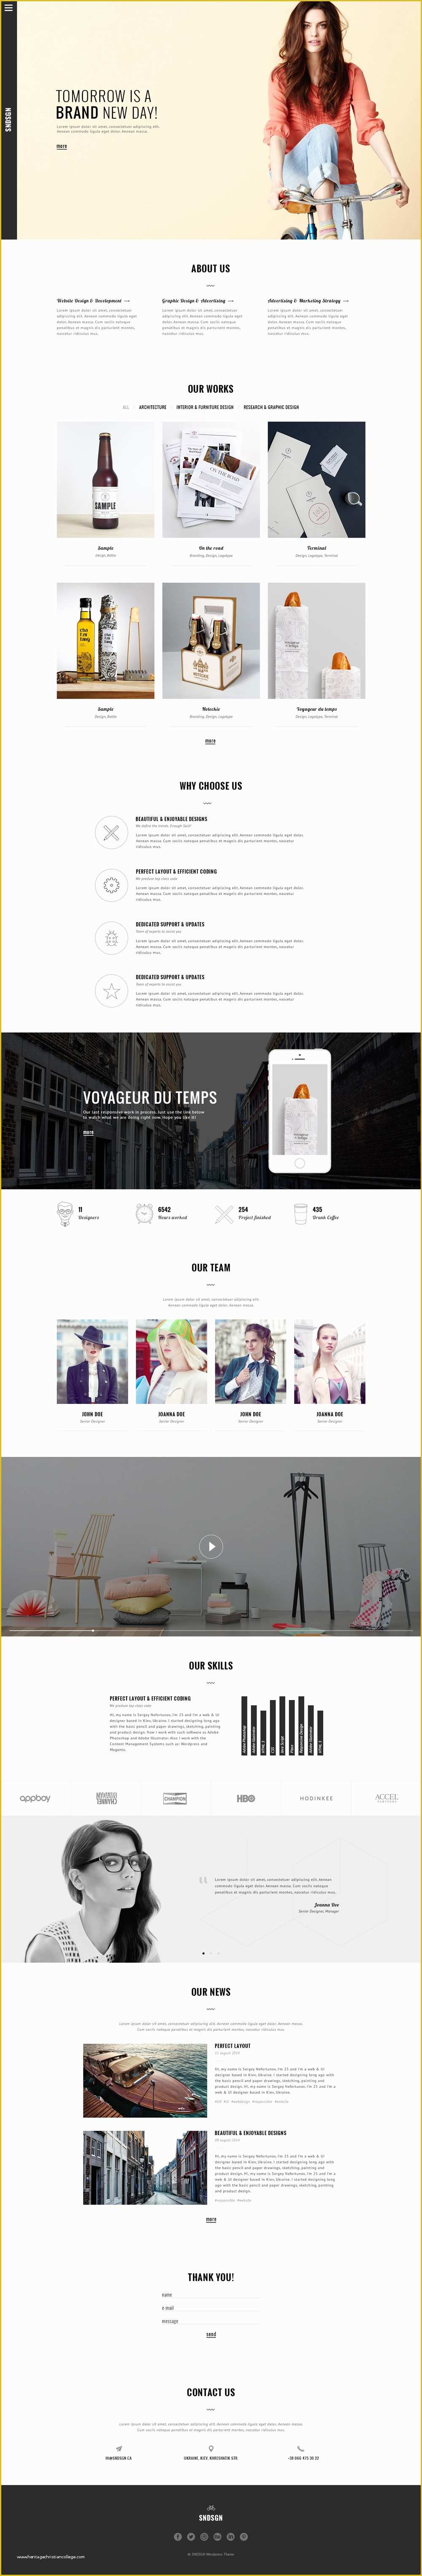 Single Page Website Template Free Of Free E Page Website Psd Template Graphicsfuel